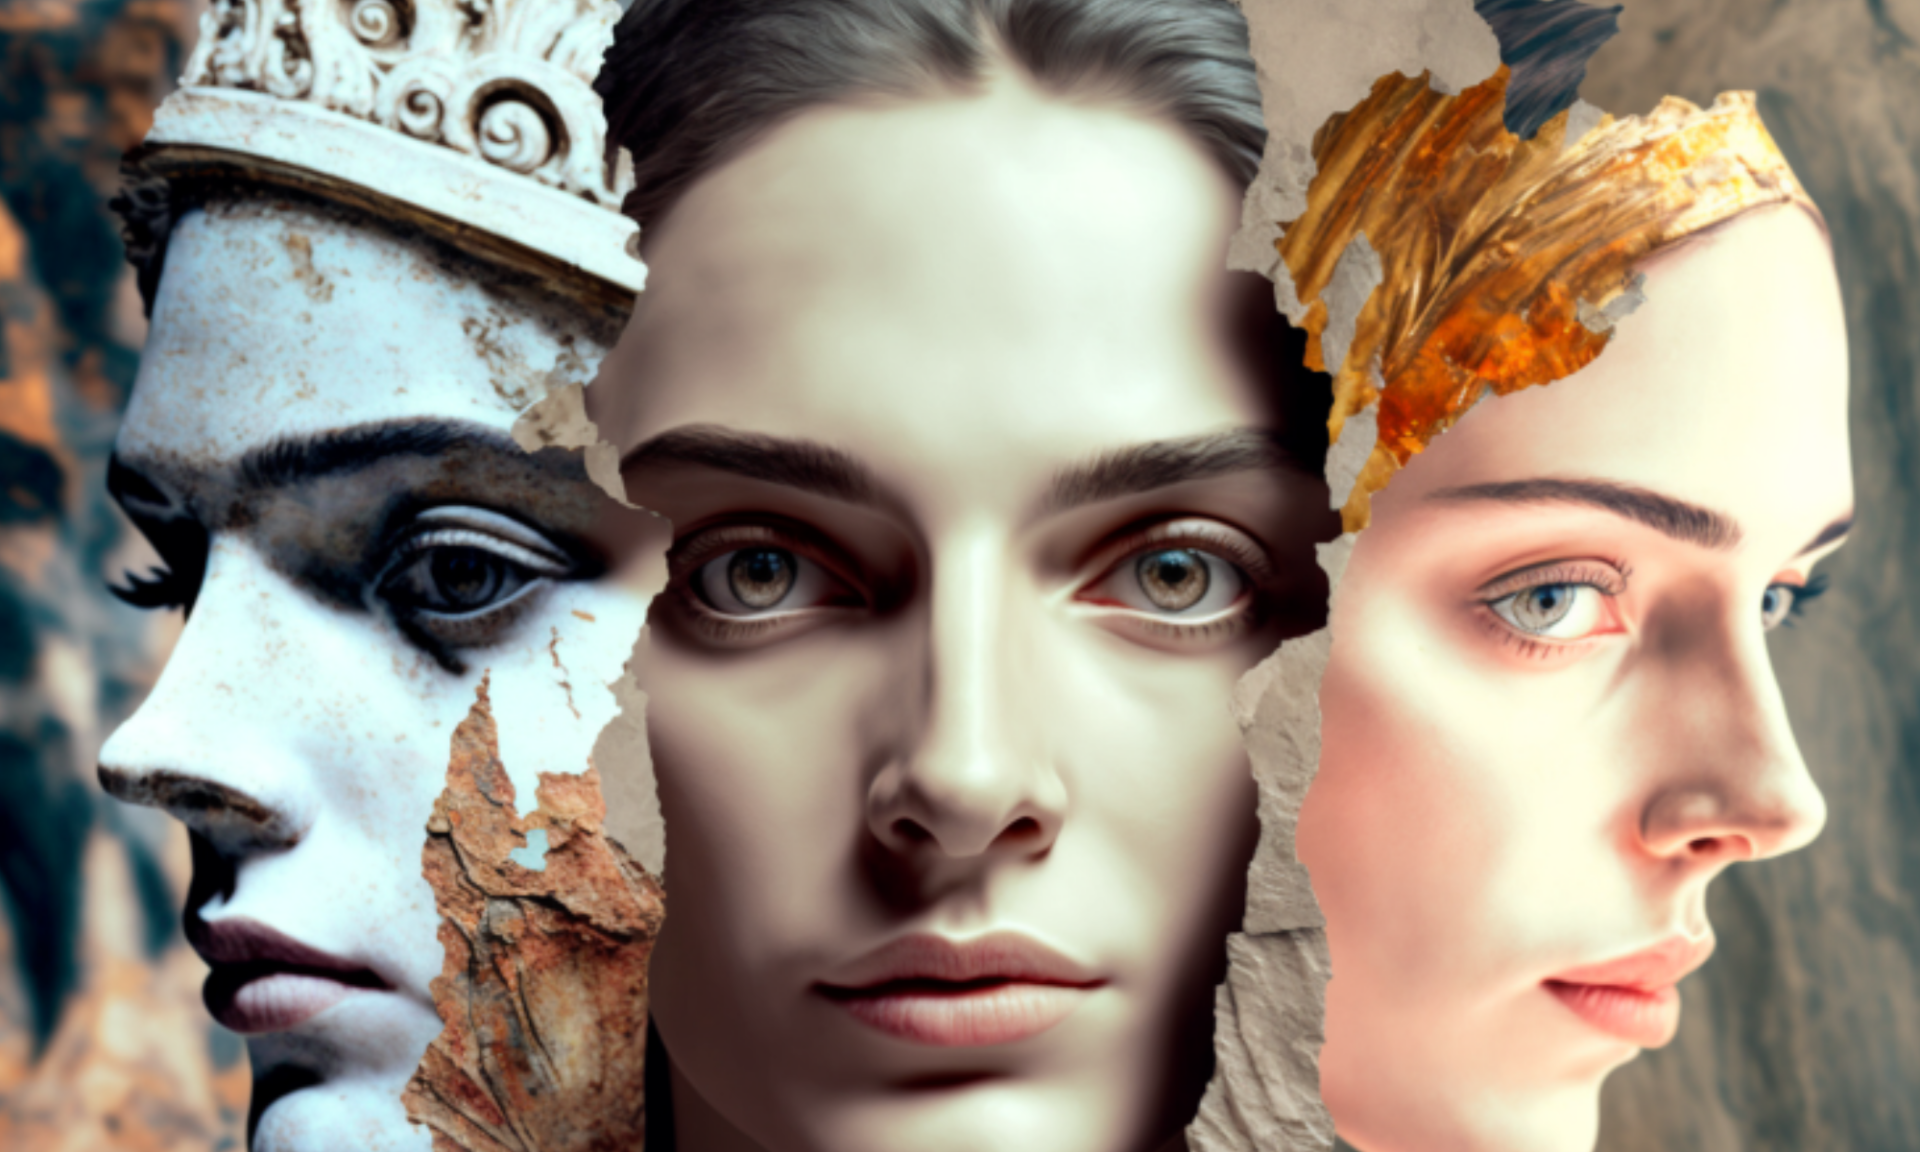 collage. beautiful faces. elements from three time periods: 2020, 1820 and 1620. Photo realistic. minute details 